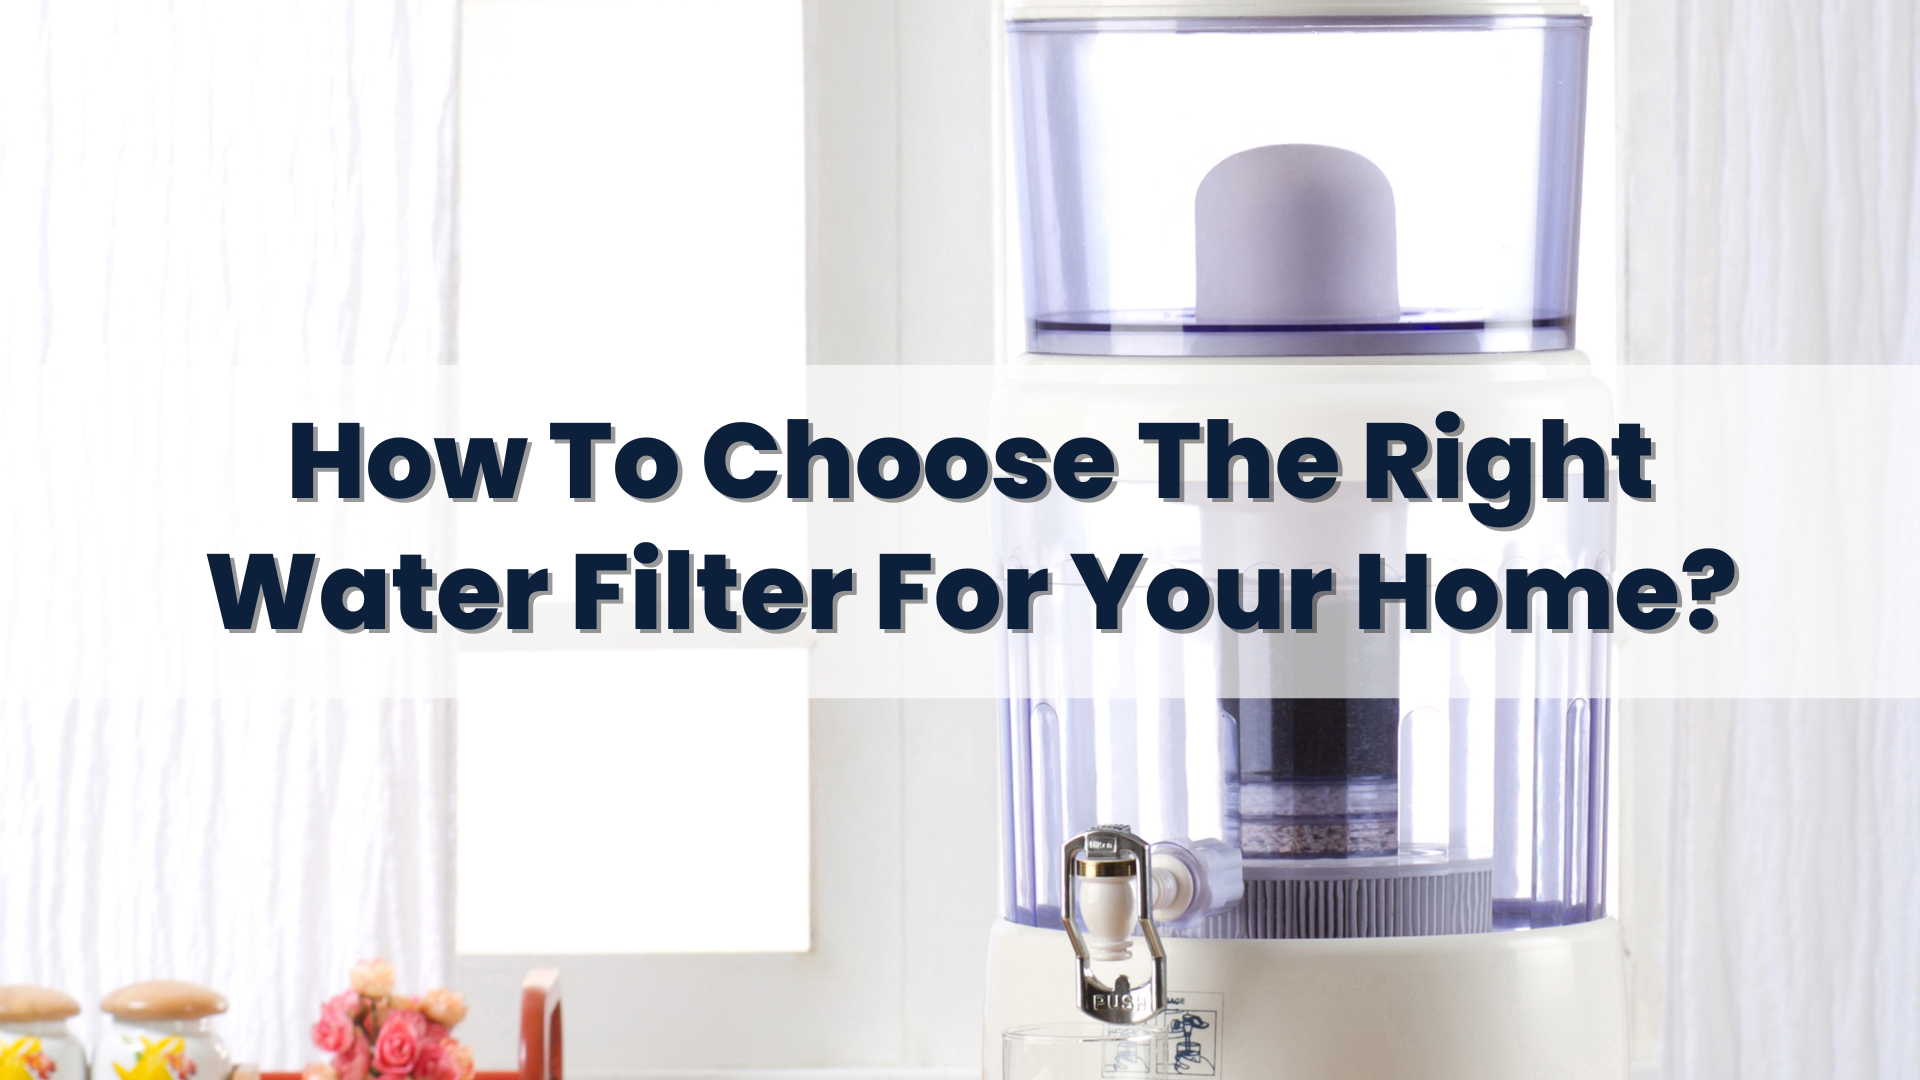 How to choose the right water filter for your home